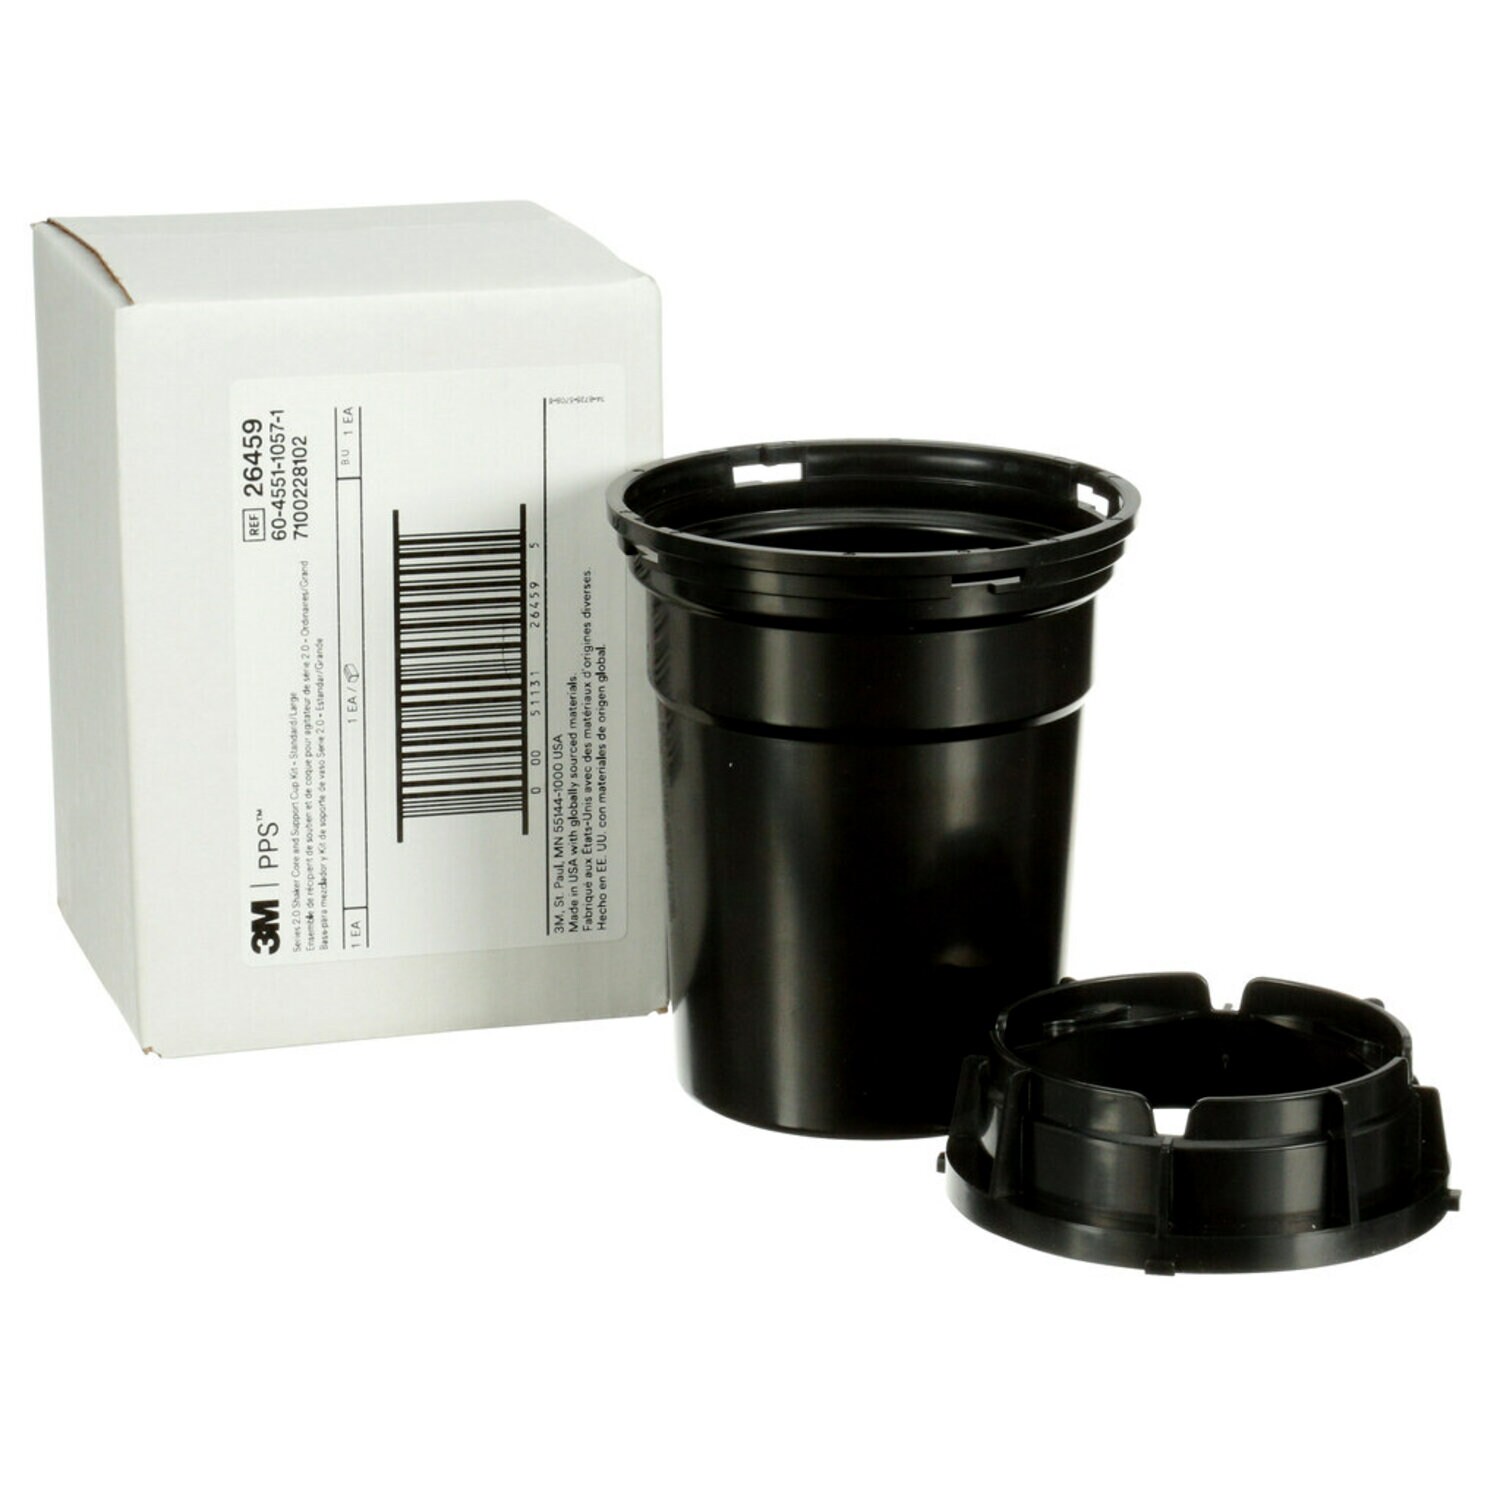 7100228102 - 3M PPS Series 2.0 Shaker Core and Support Cup Kit 26459,
Standard/Large, 1/Case